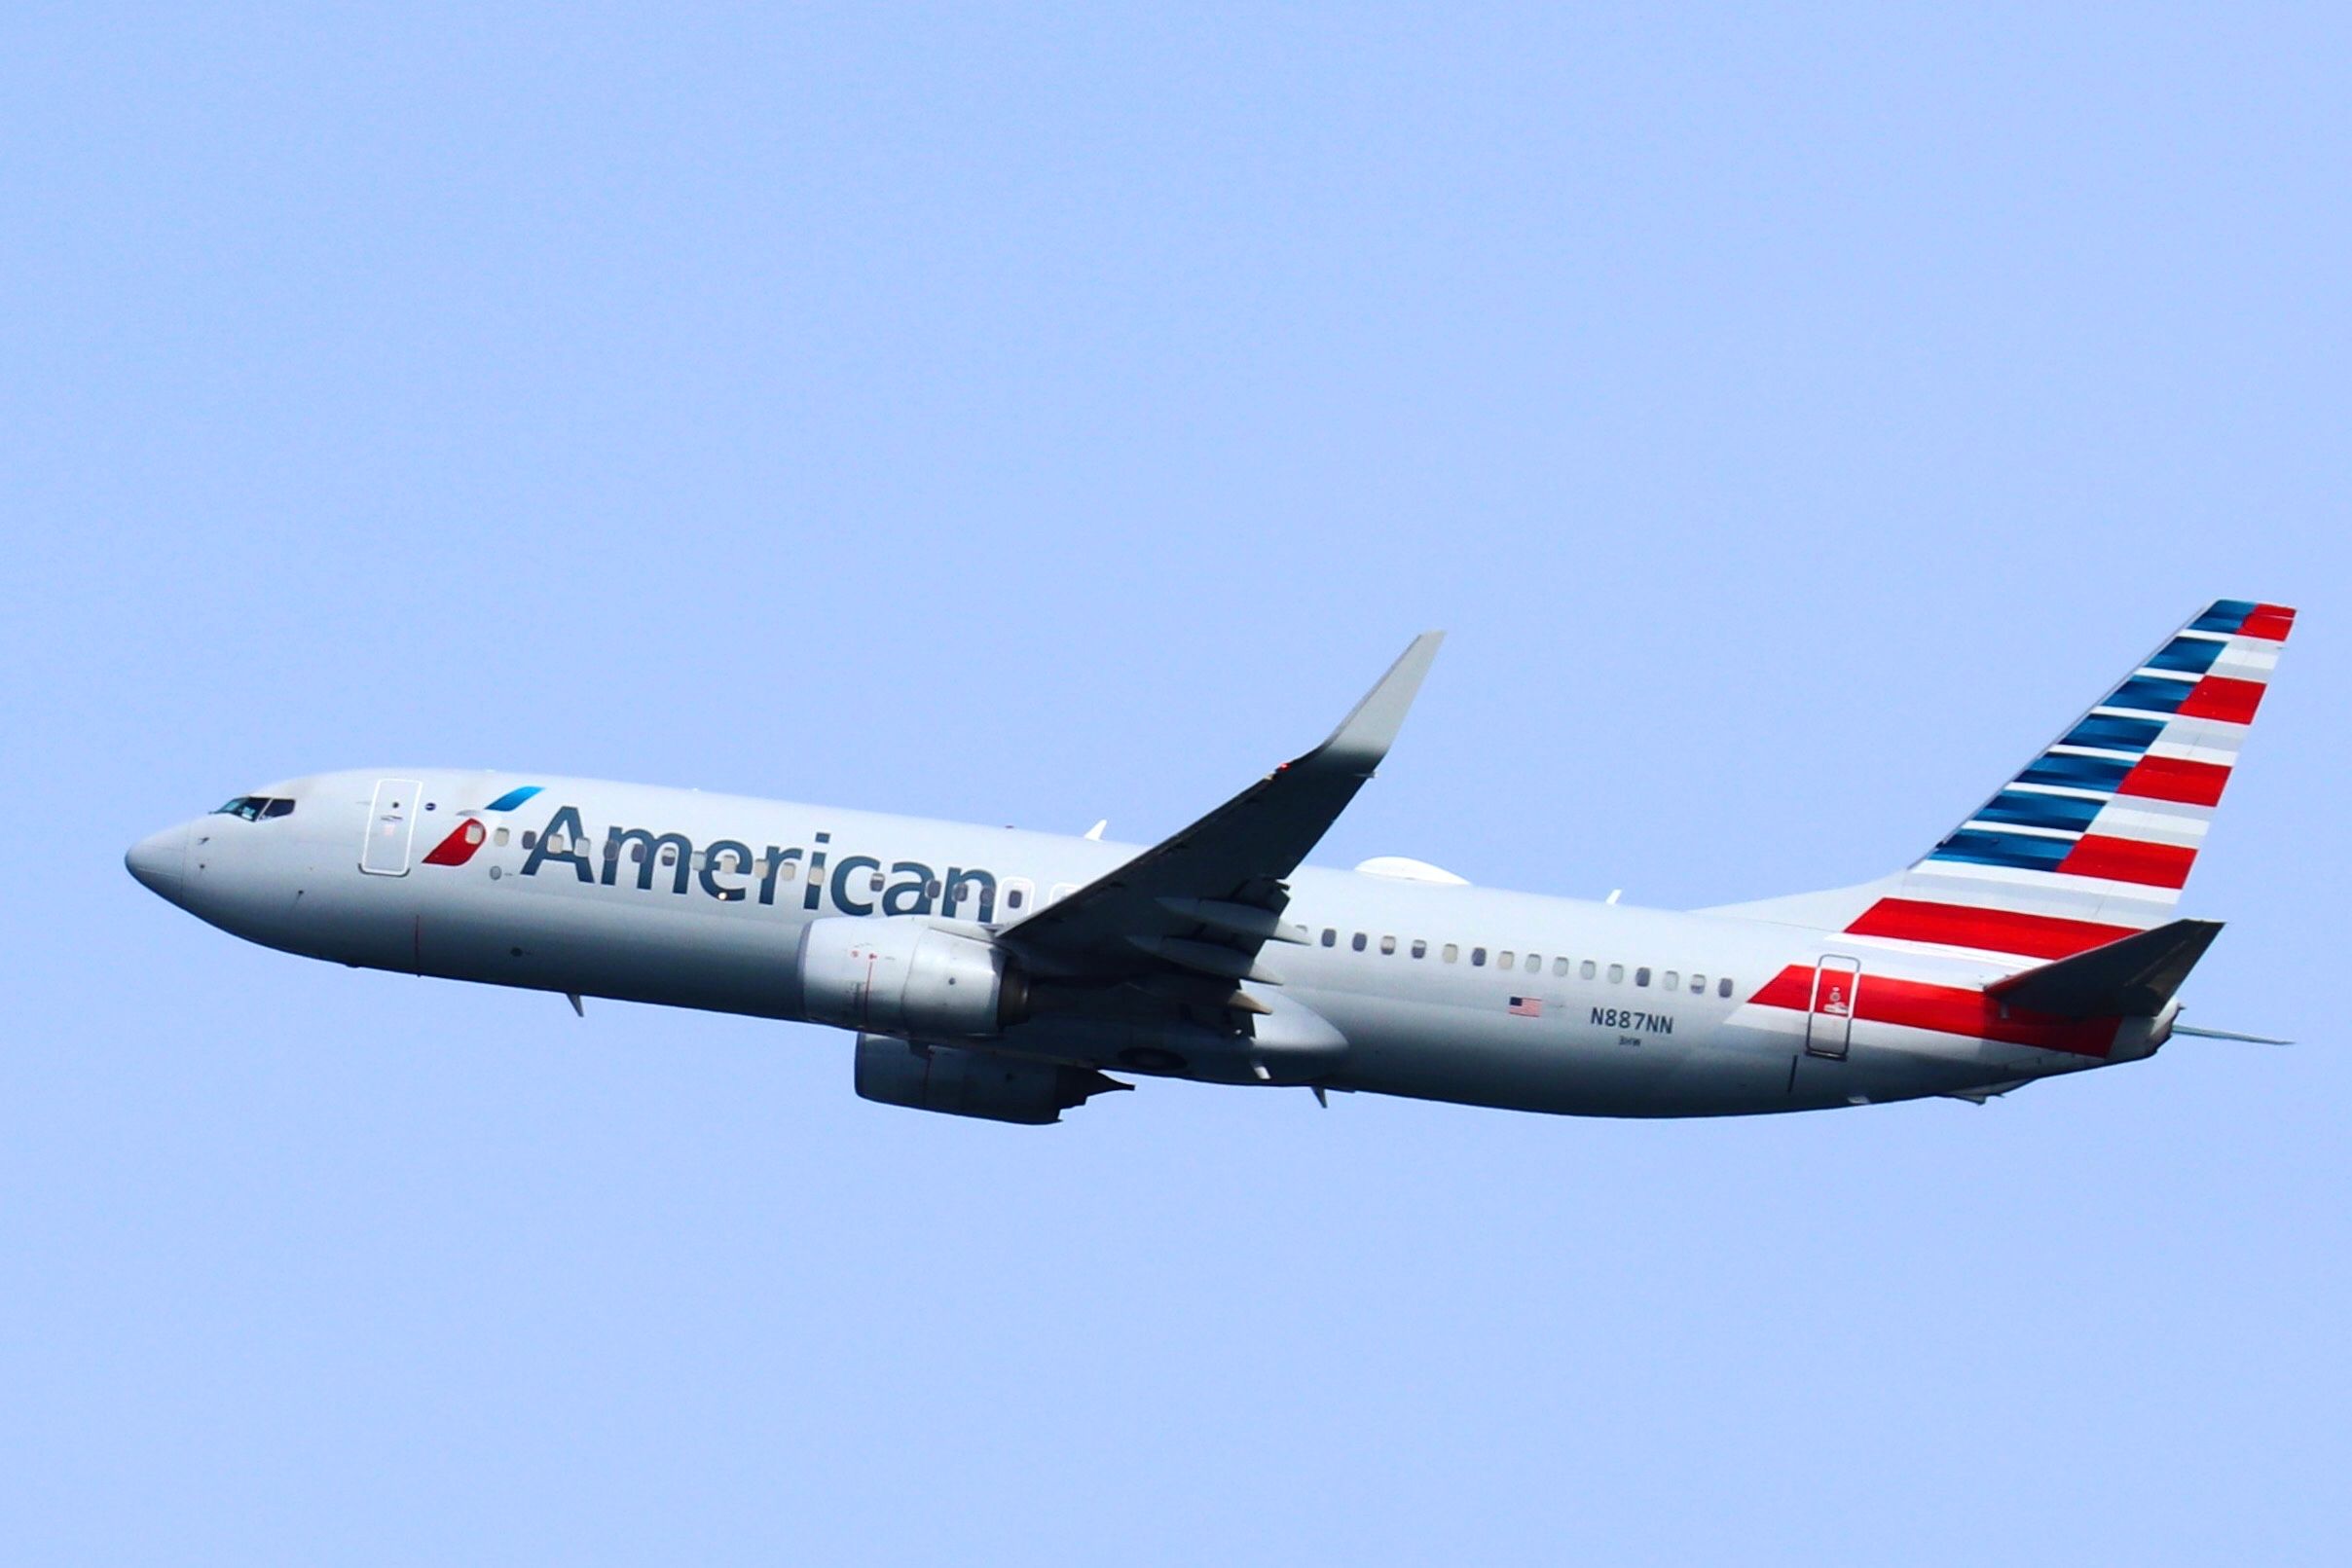 American Airlines 737-800 (N887NN) departing Boston for Dallas Fort Worth on 04/28/2023.